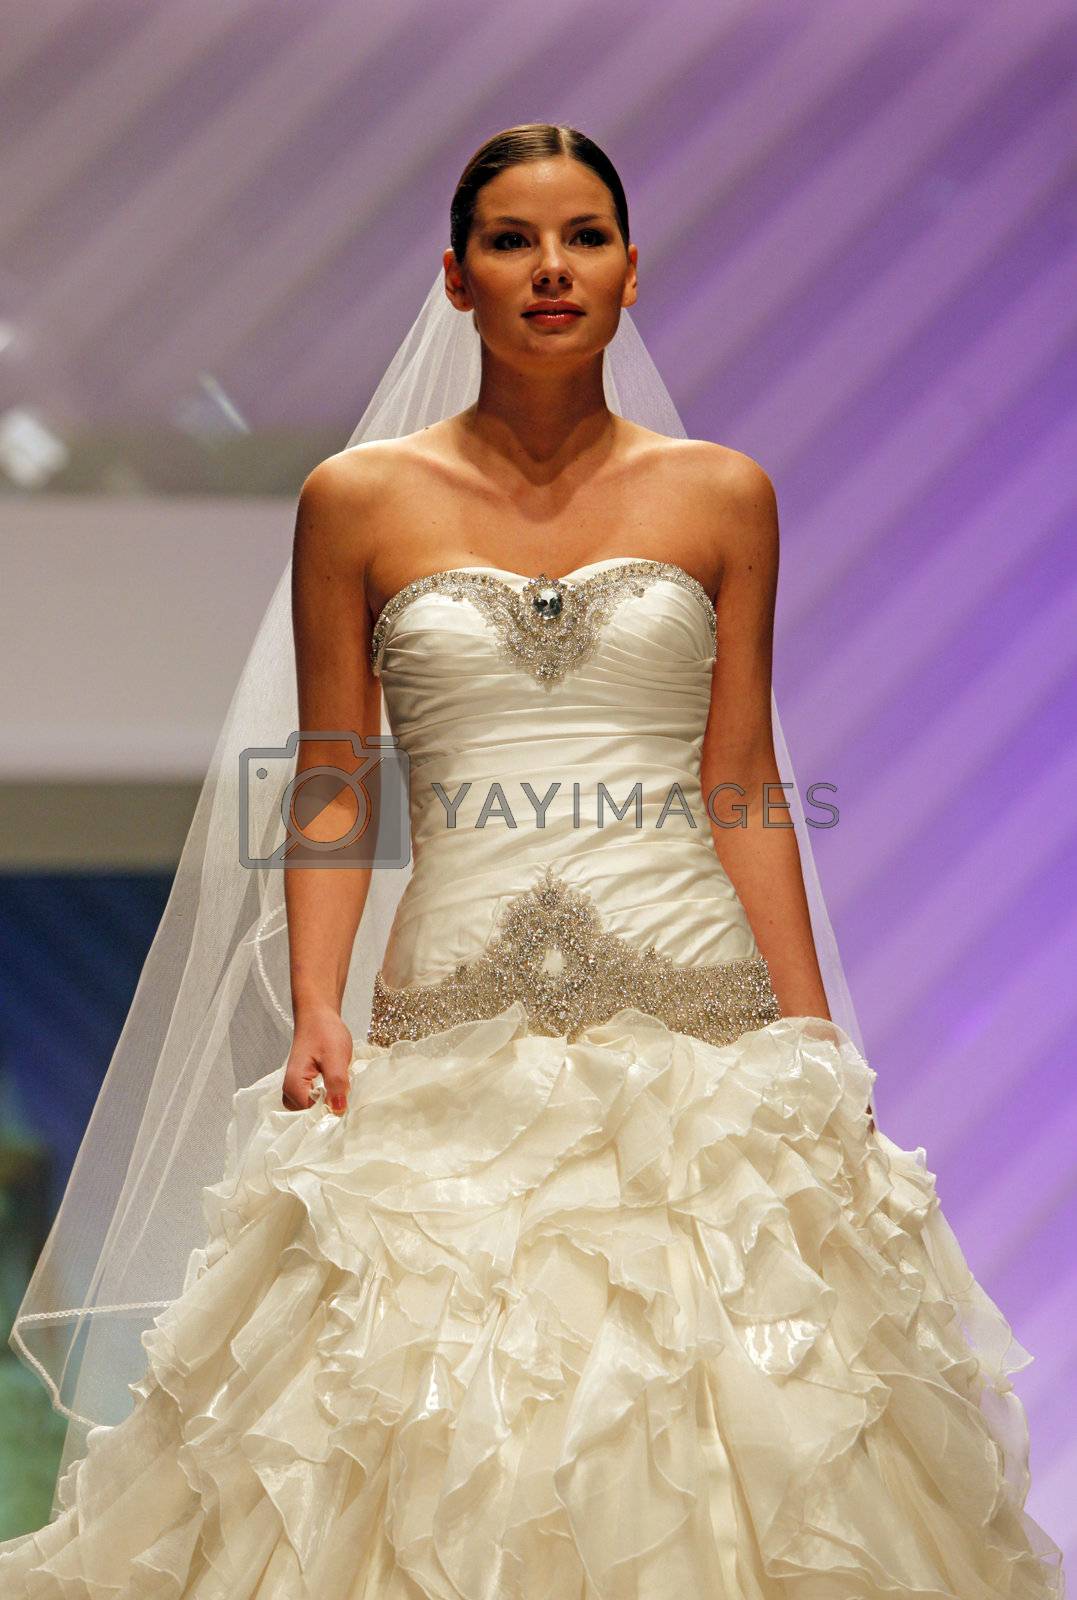 Royalty free image of Wedding dresses fashion show by atlas